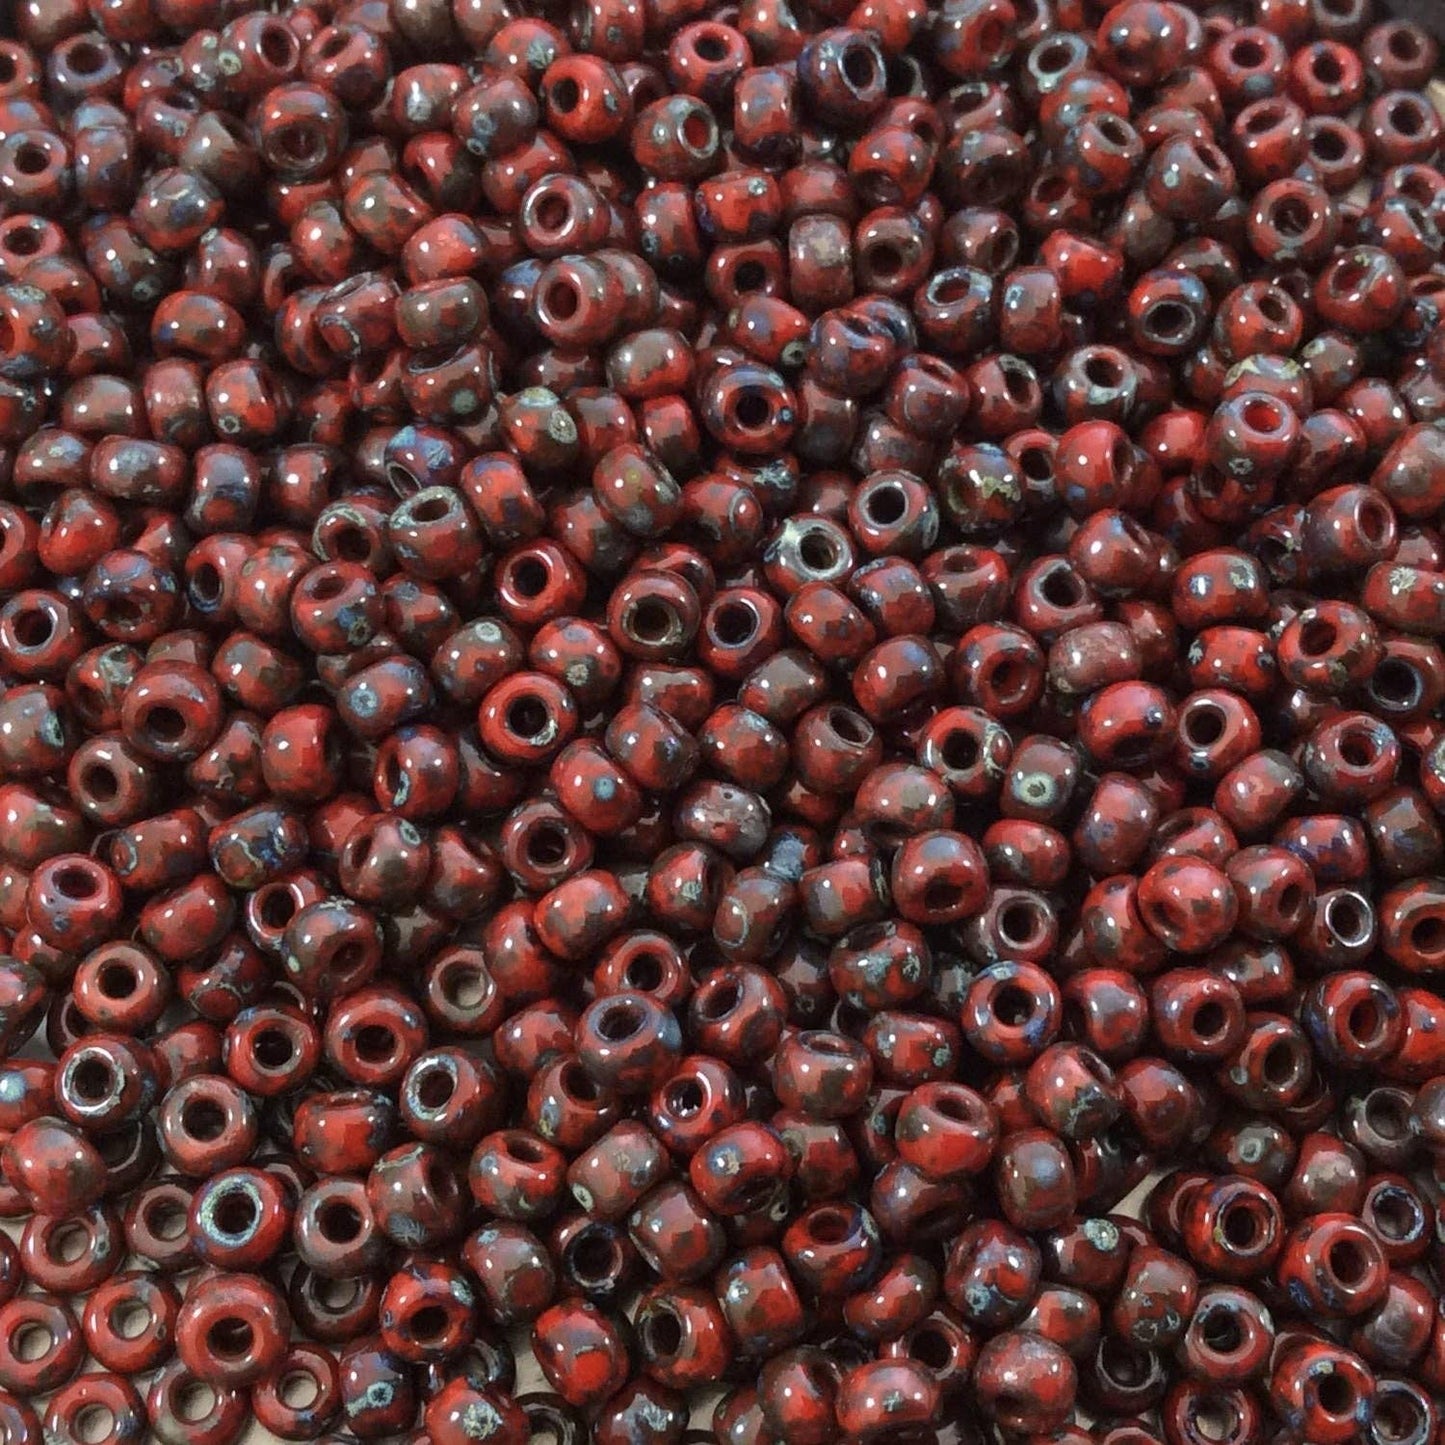 Size 8/0 Opaque Matte Picasso Red Garnet Genuine Miyuki Glass Seed Beads - Sold by 22 Gram Tubes (Approx. 900 Beads per Tube) - (8-94513)